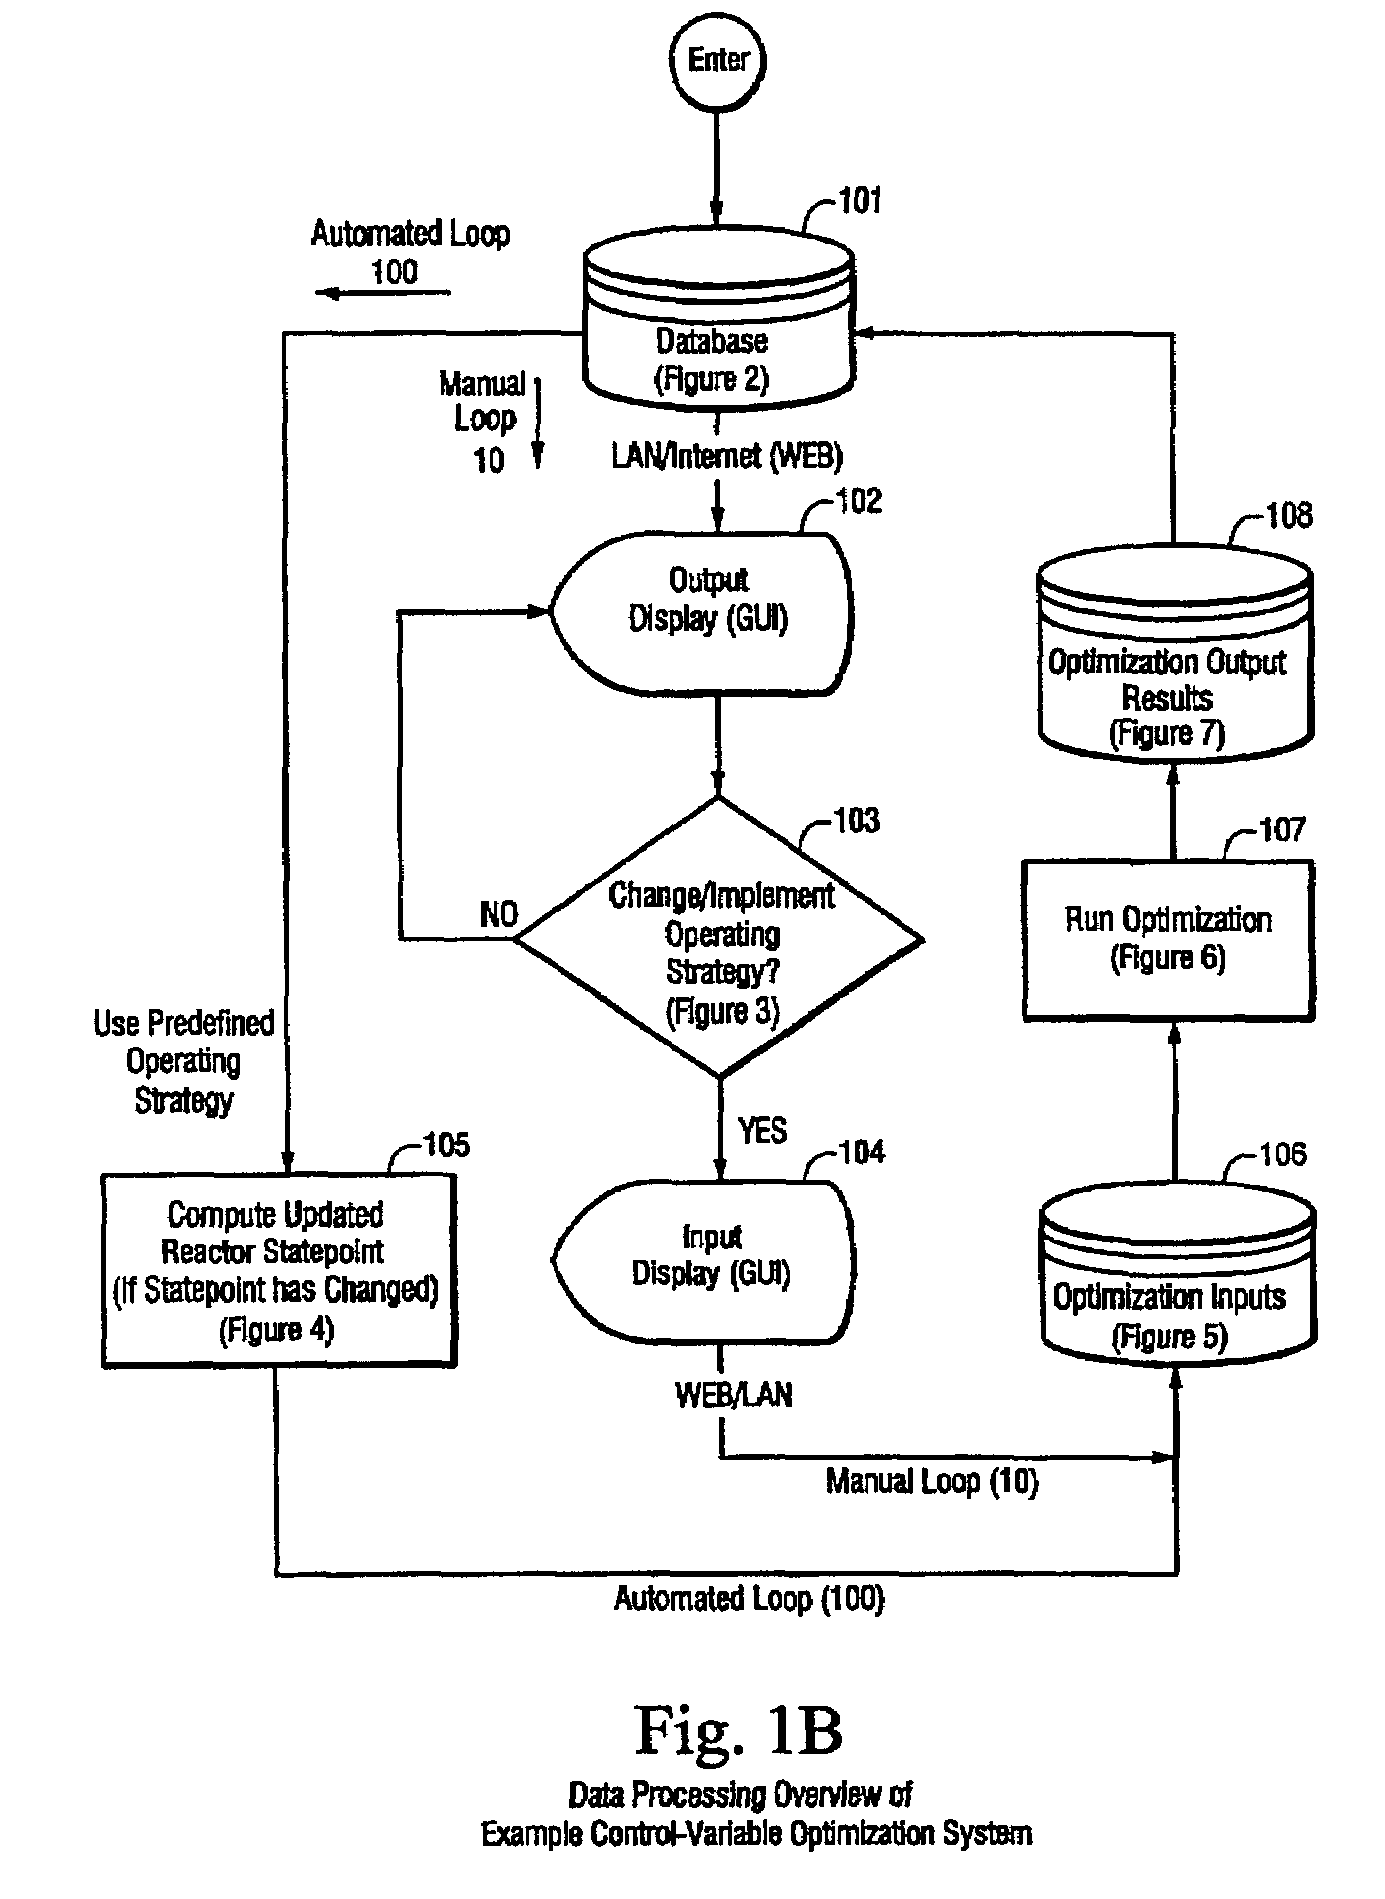 System and method for continuous optimization of control-variables during operation of a nuclear reactor